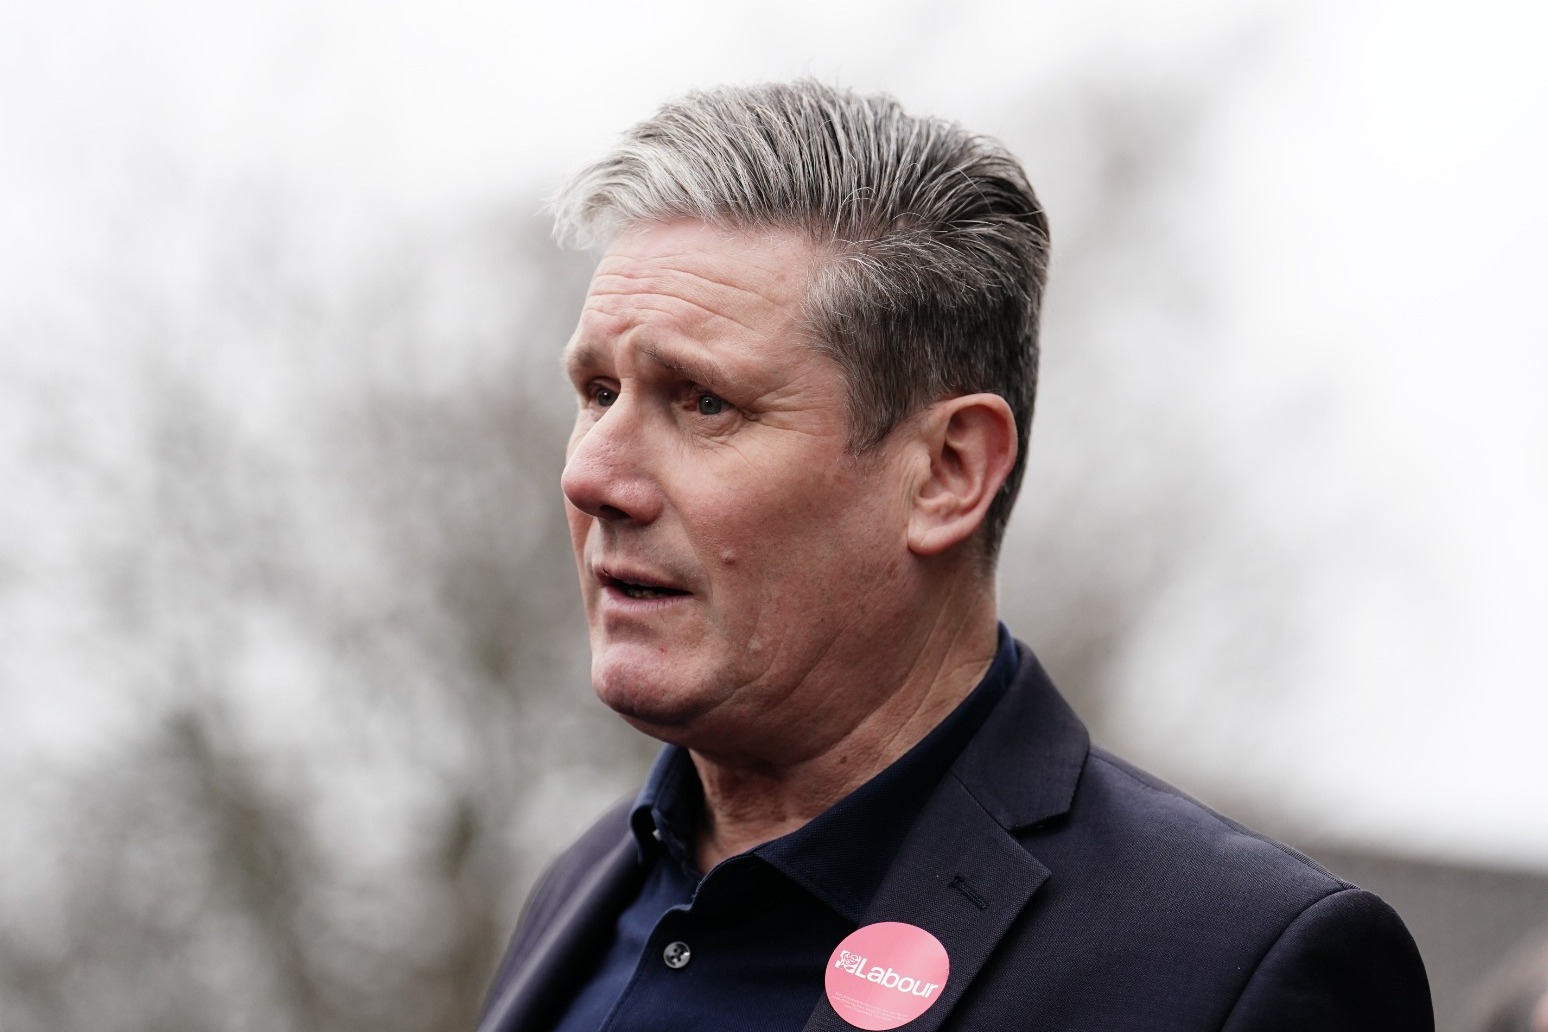 Labour ‘united’ insists Starmer after Corbyn candidate exclusion 